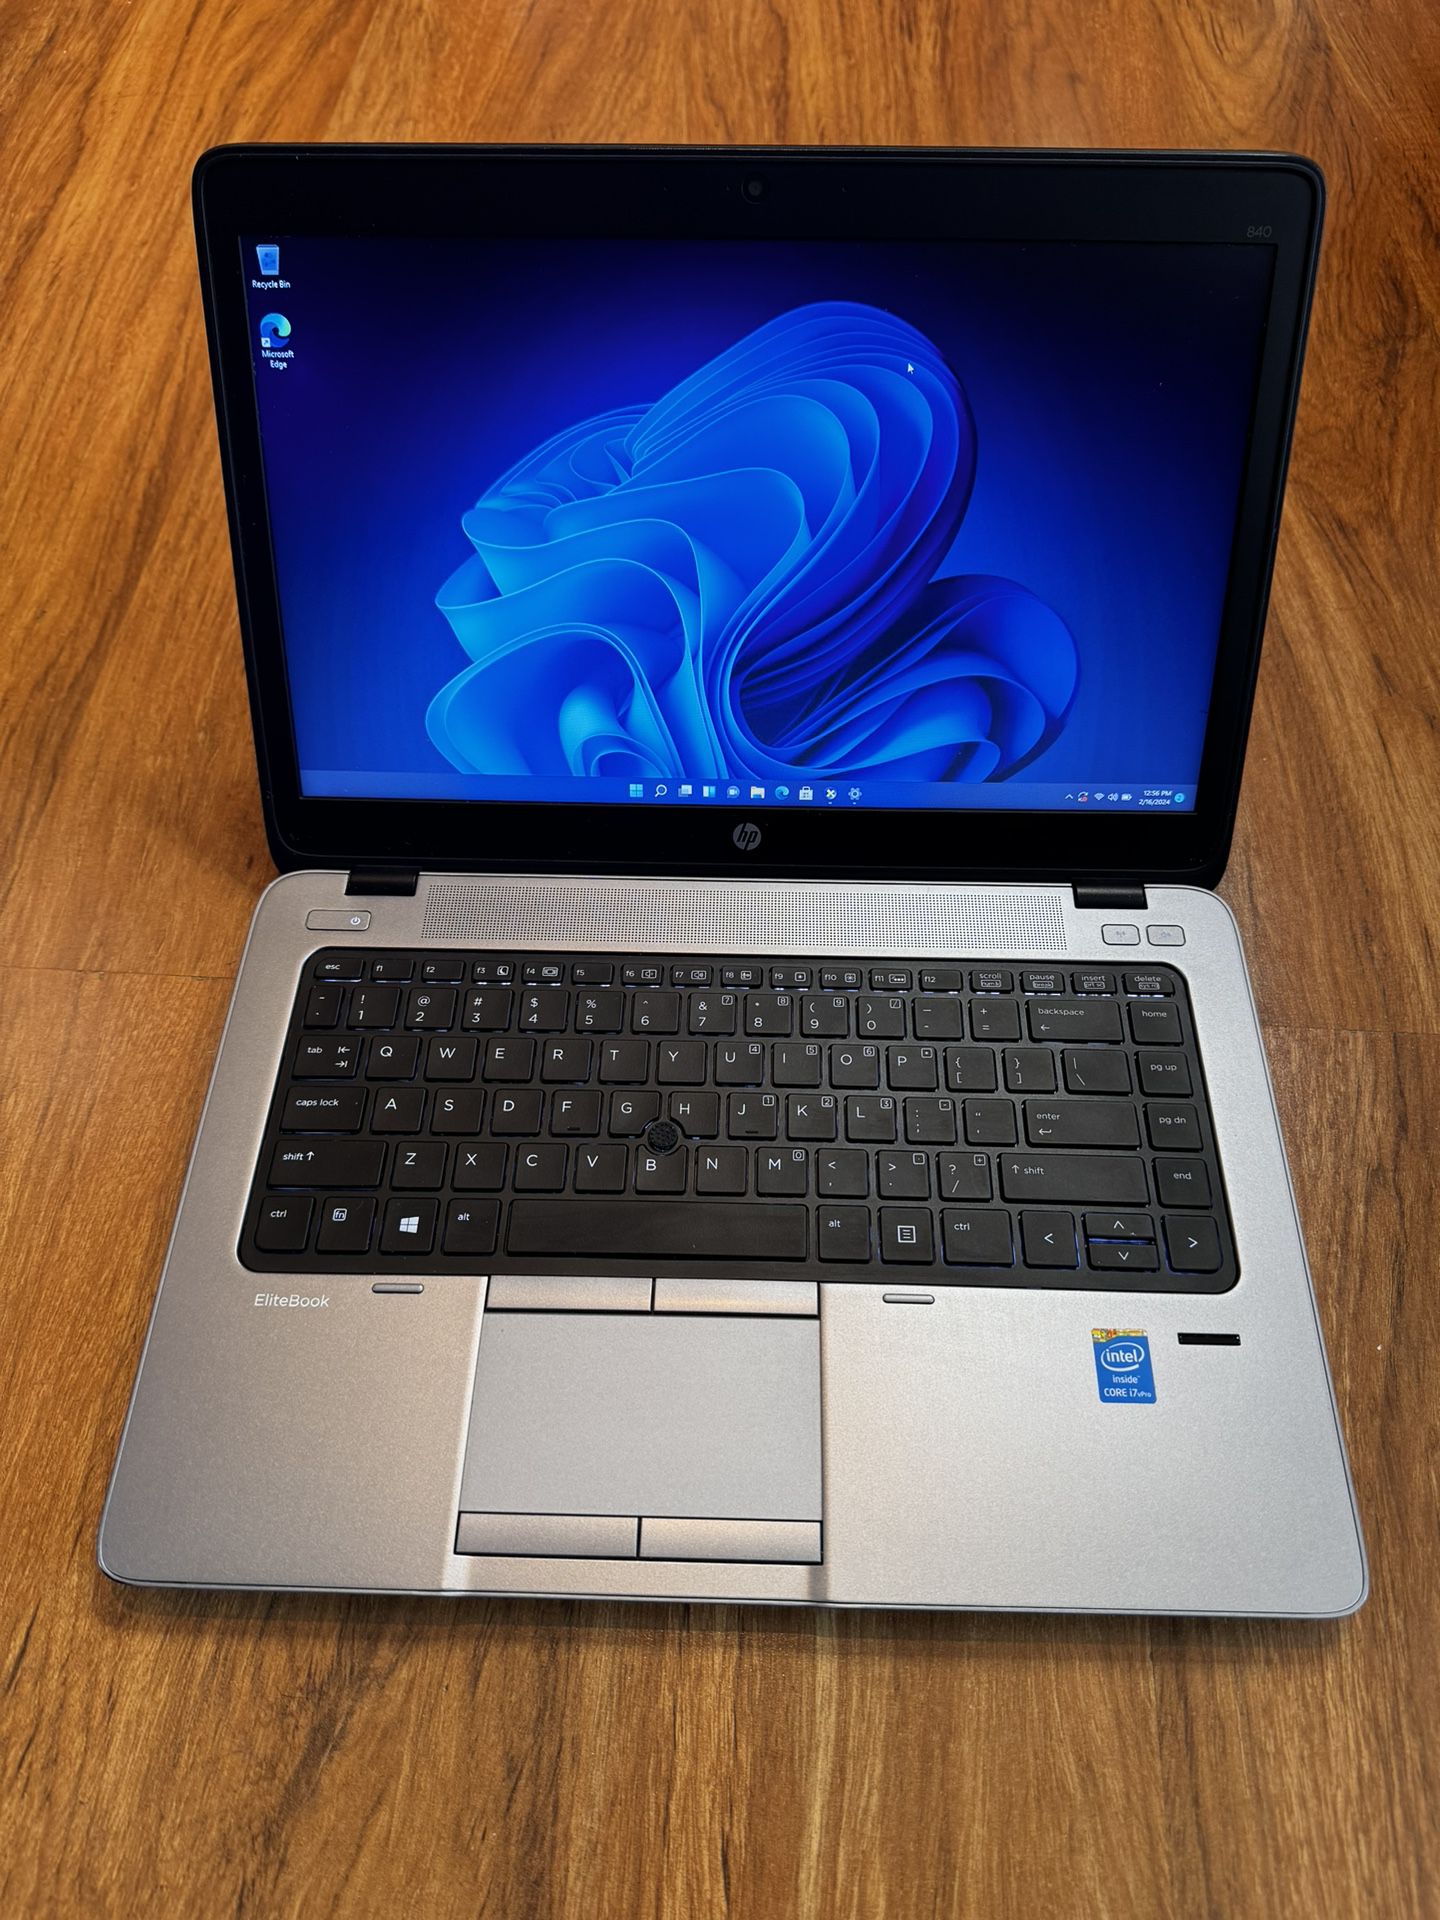 HP EliteBook 840 G1 core i7 4th gen 8GB Ram 256GB SSD Windows 11 Pro 14.1” FHD Screen Laptop with charger in Excellent Working condition!!!!  Specific